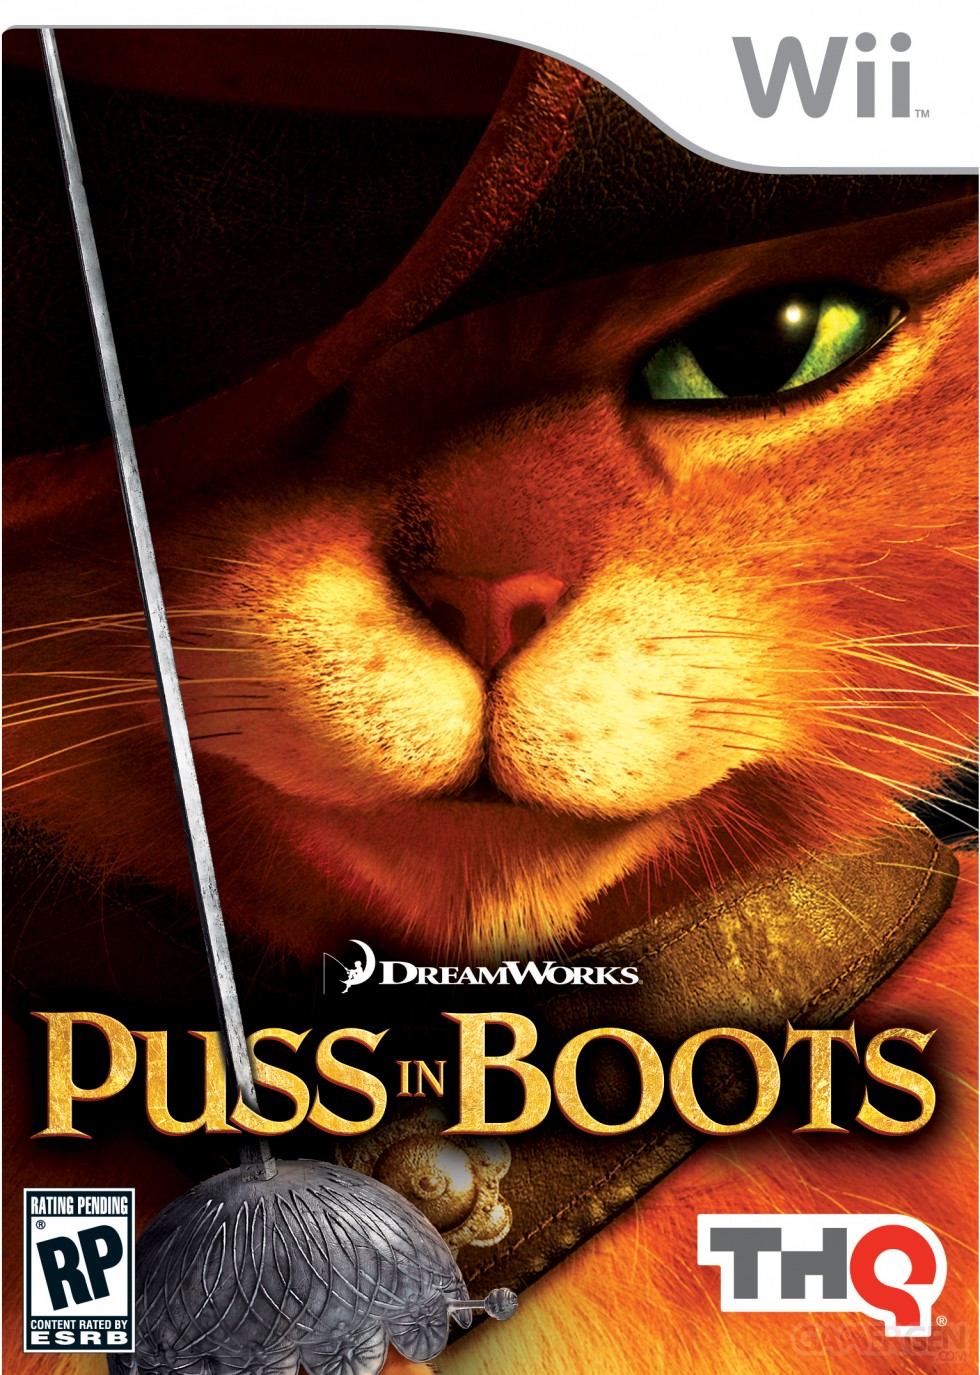 puss-in-boots-chat-potte-thq-jaquette-cover-boxart-us